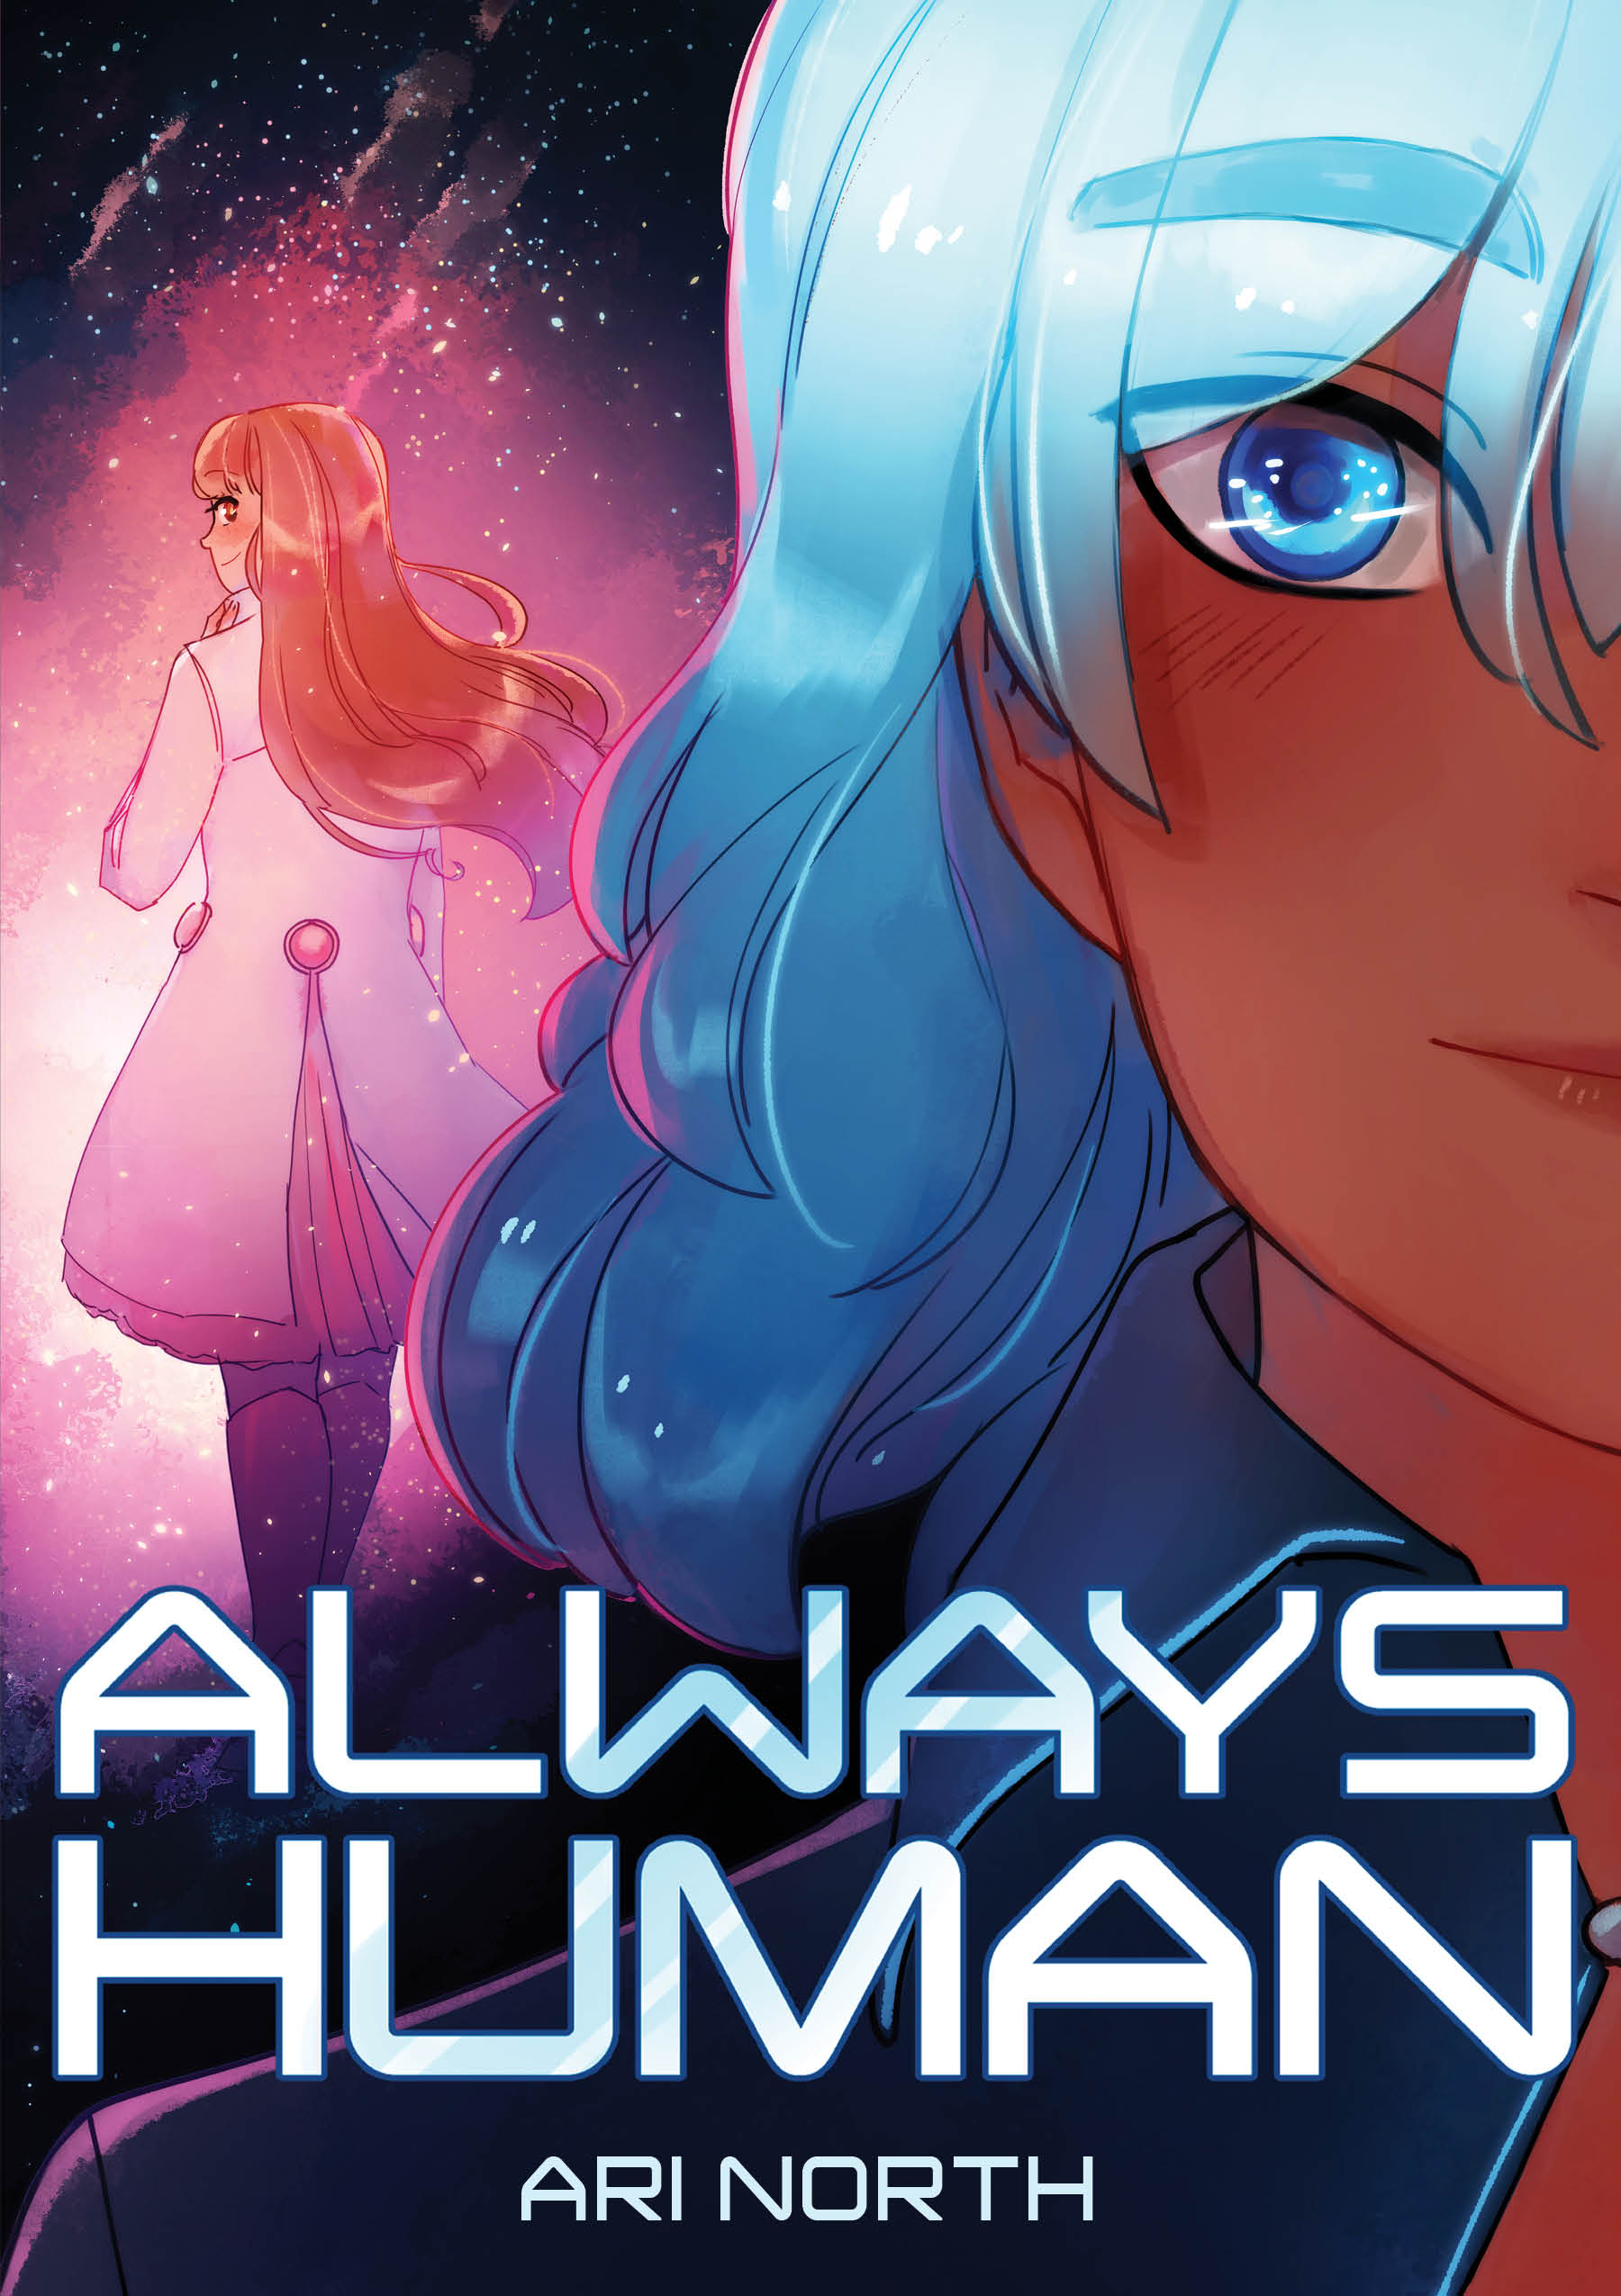 Interview with Ari North, Creator of Always Human